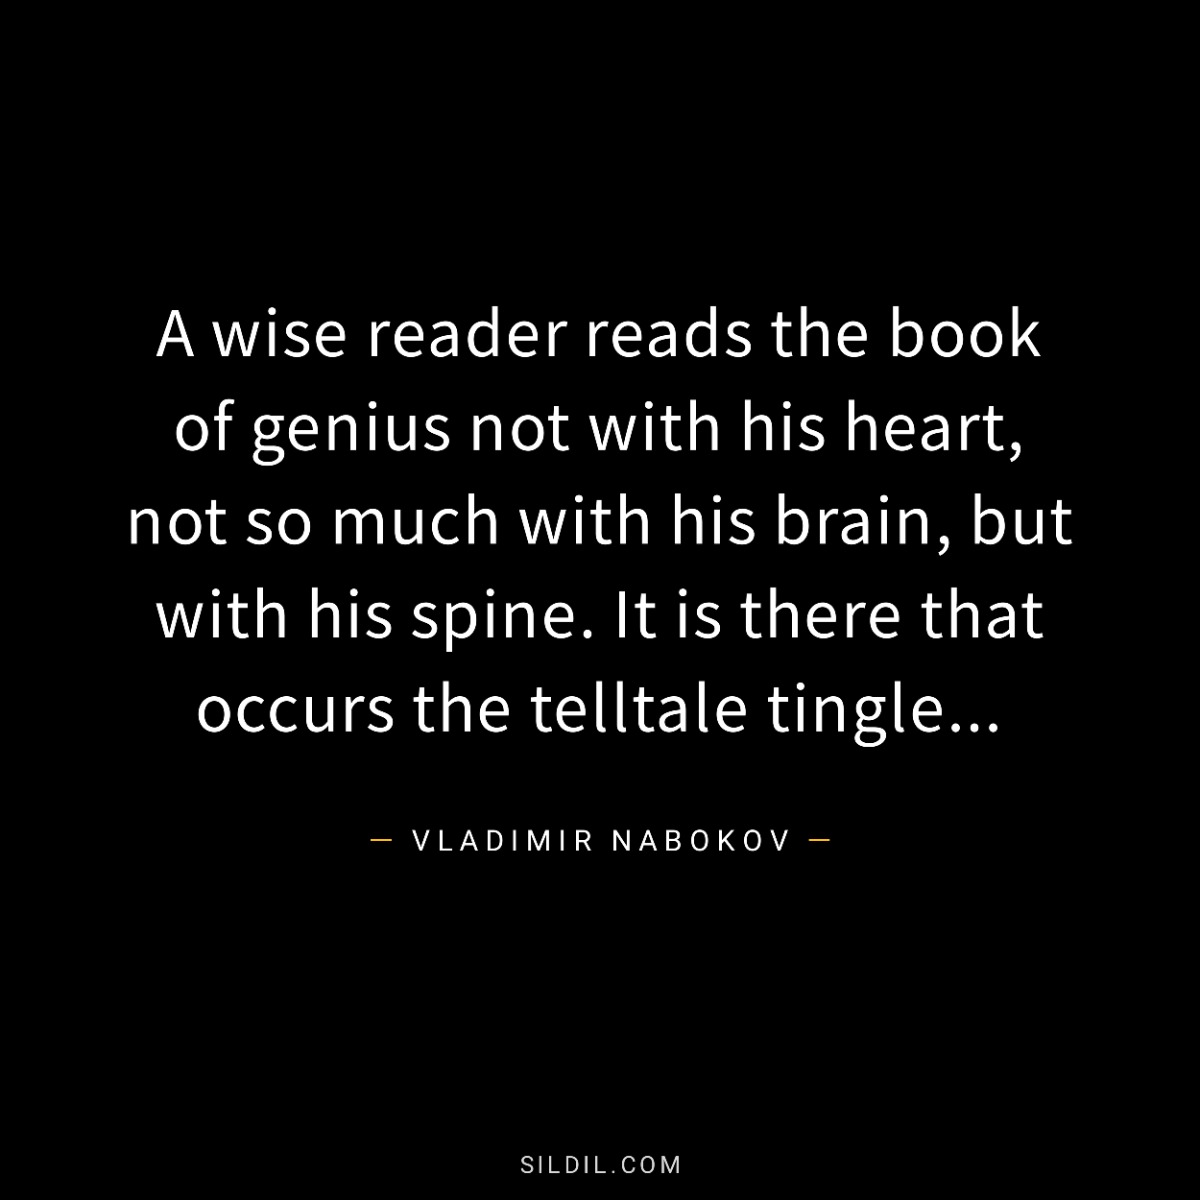 A wise reader reads the book of genius not with his heart, not so much with his brain, but with his spine. It is there that occurs the telltale tingle...